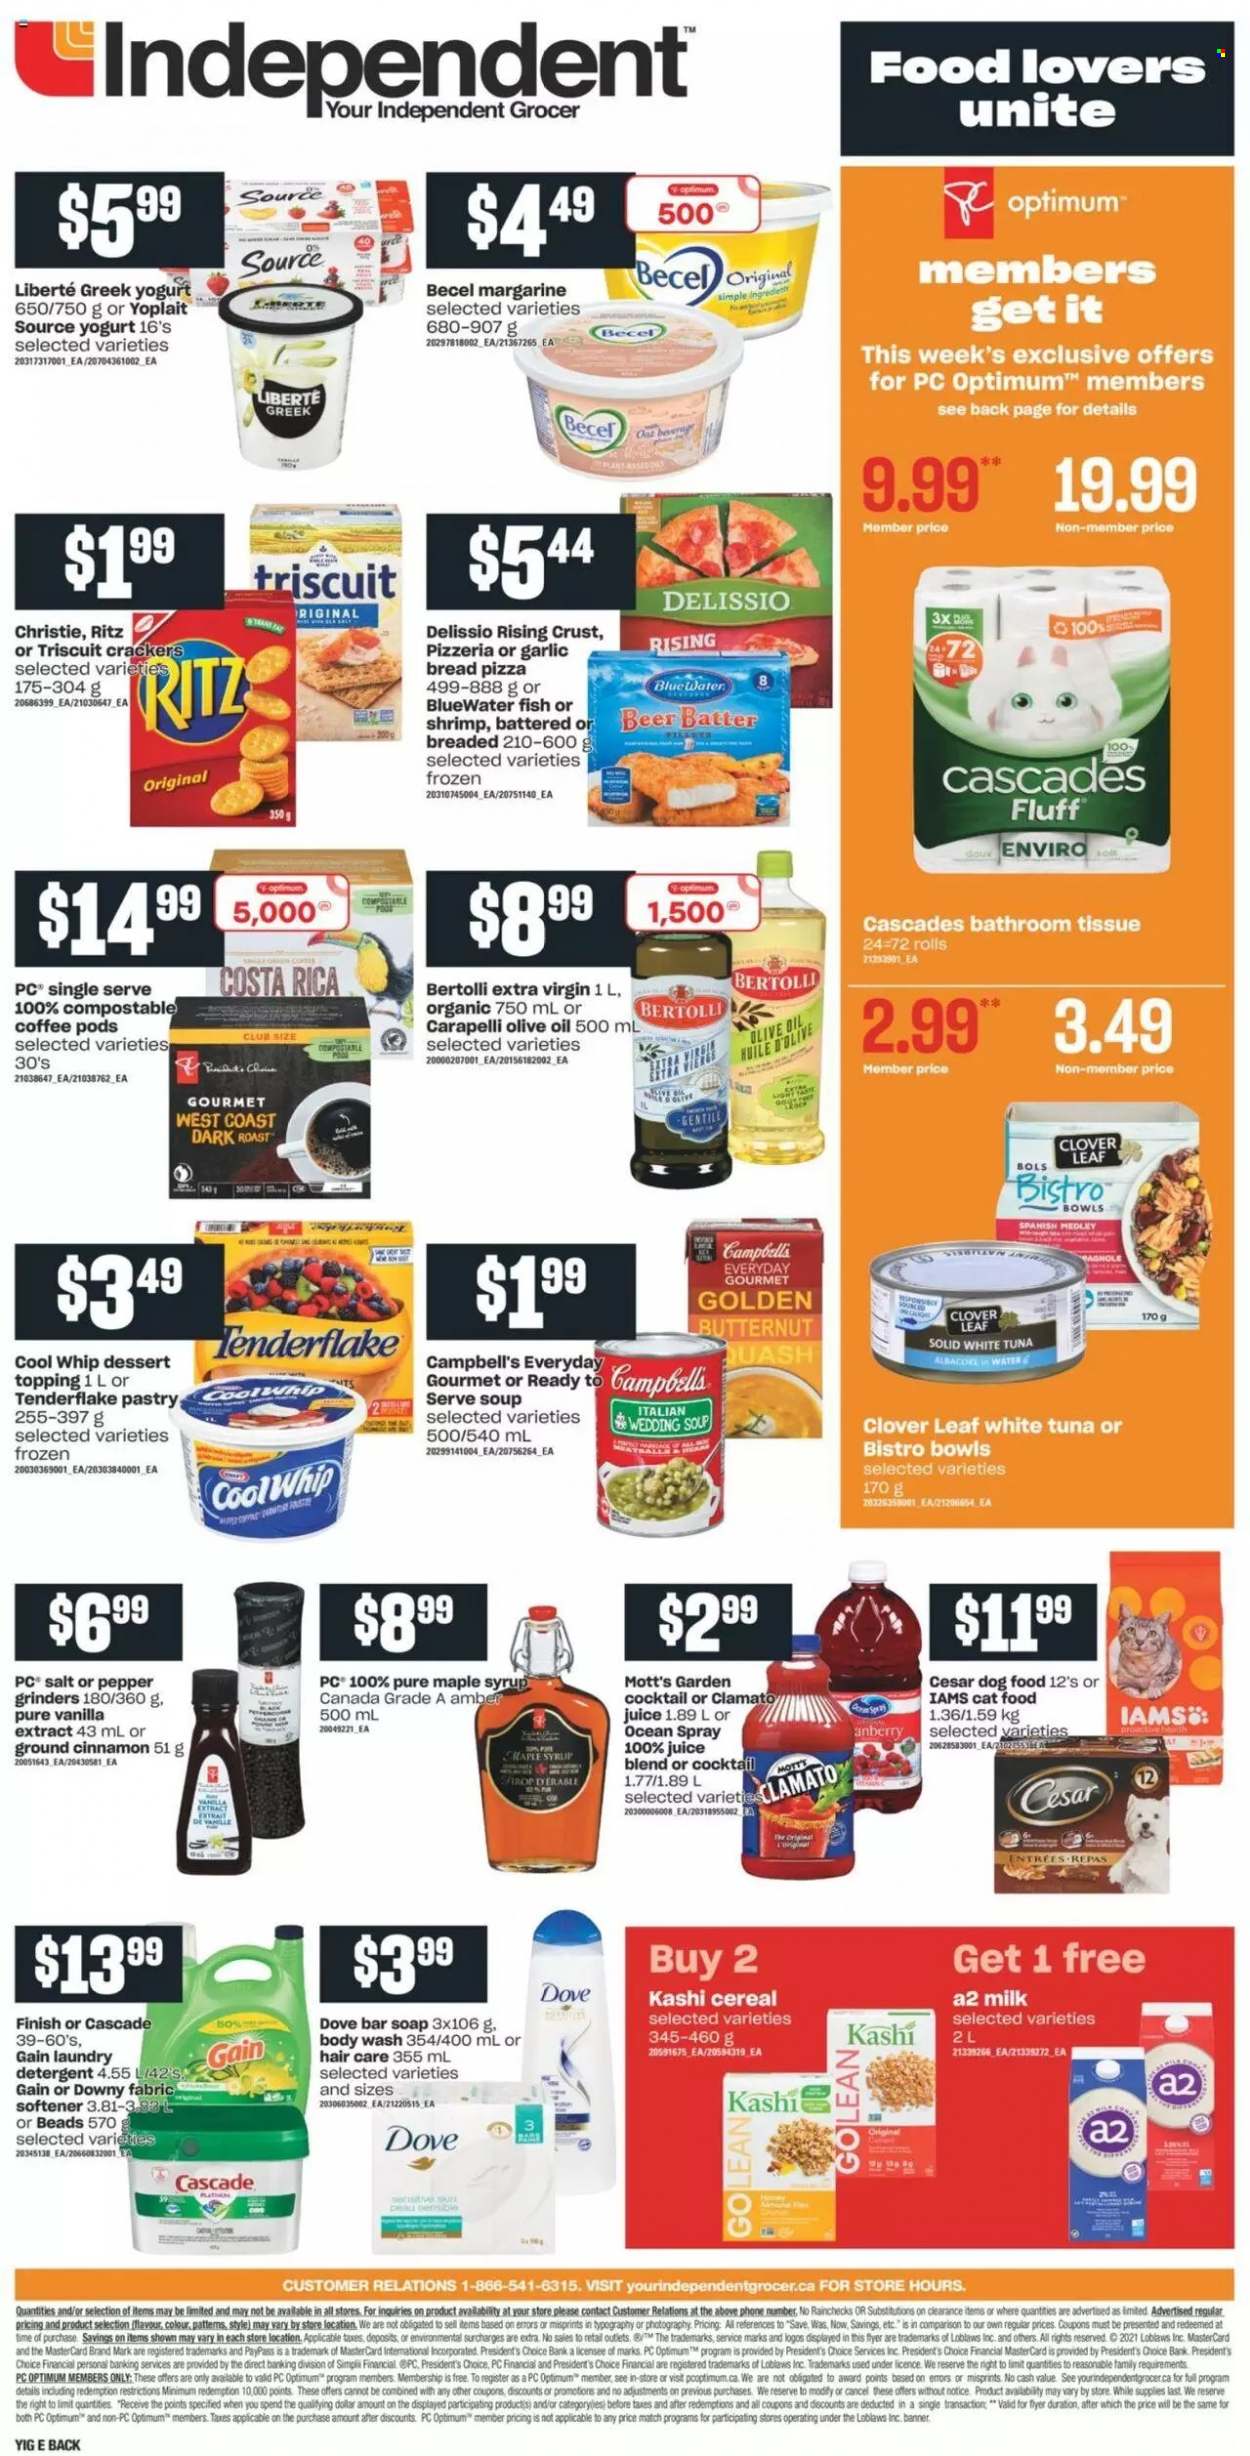 thumbnail - Independent Flyer - October 07, 2021 - October 13, 2021 - Sales products - bread, butternut squash, Mott's, fish, shrimps, Campbell's, pizza, soup, Bertolli, Président, greek yoghurt, yoghurt, Clover, Yoplait, milk, margarine, Cool Whip, crackers, RITZ, salt, topping, vanilla extract, cereals, cinnamon, extra virgin olive oil, olive oil, oil, maple syrup, syrup, juice, Clamato, coffee pods, beer, bath tissue, Gain, fabric softener, laundry detergent, Cascade, Downy Laundry, body wash, soap bar, soap, animal food, cat food, dog food, Optimum, Iams, detergent, Dove. Page 2.